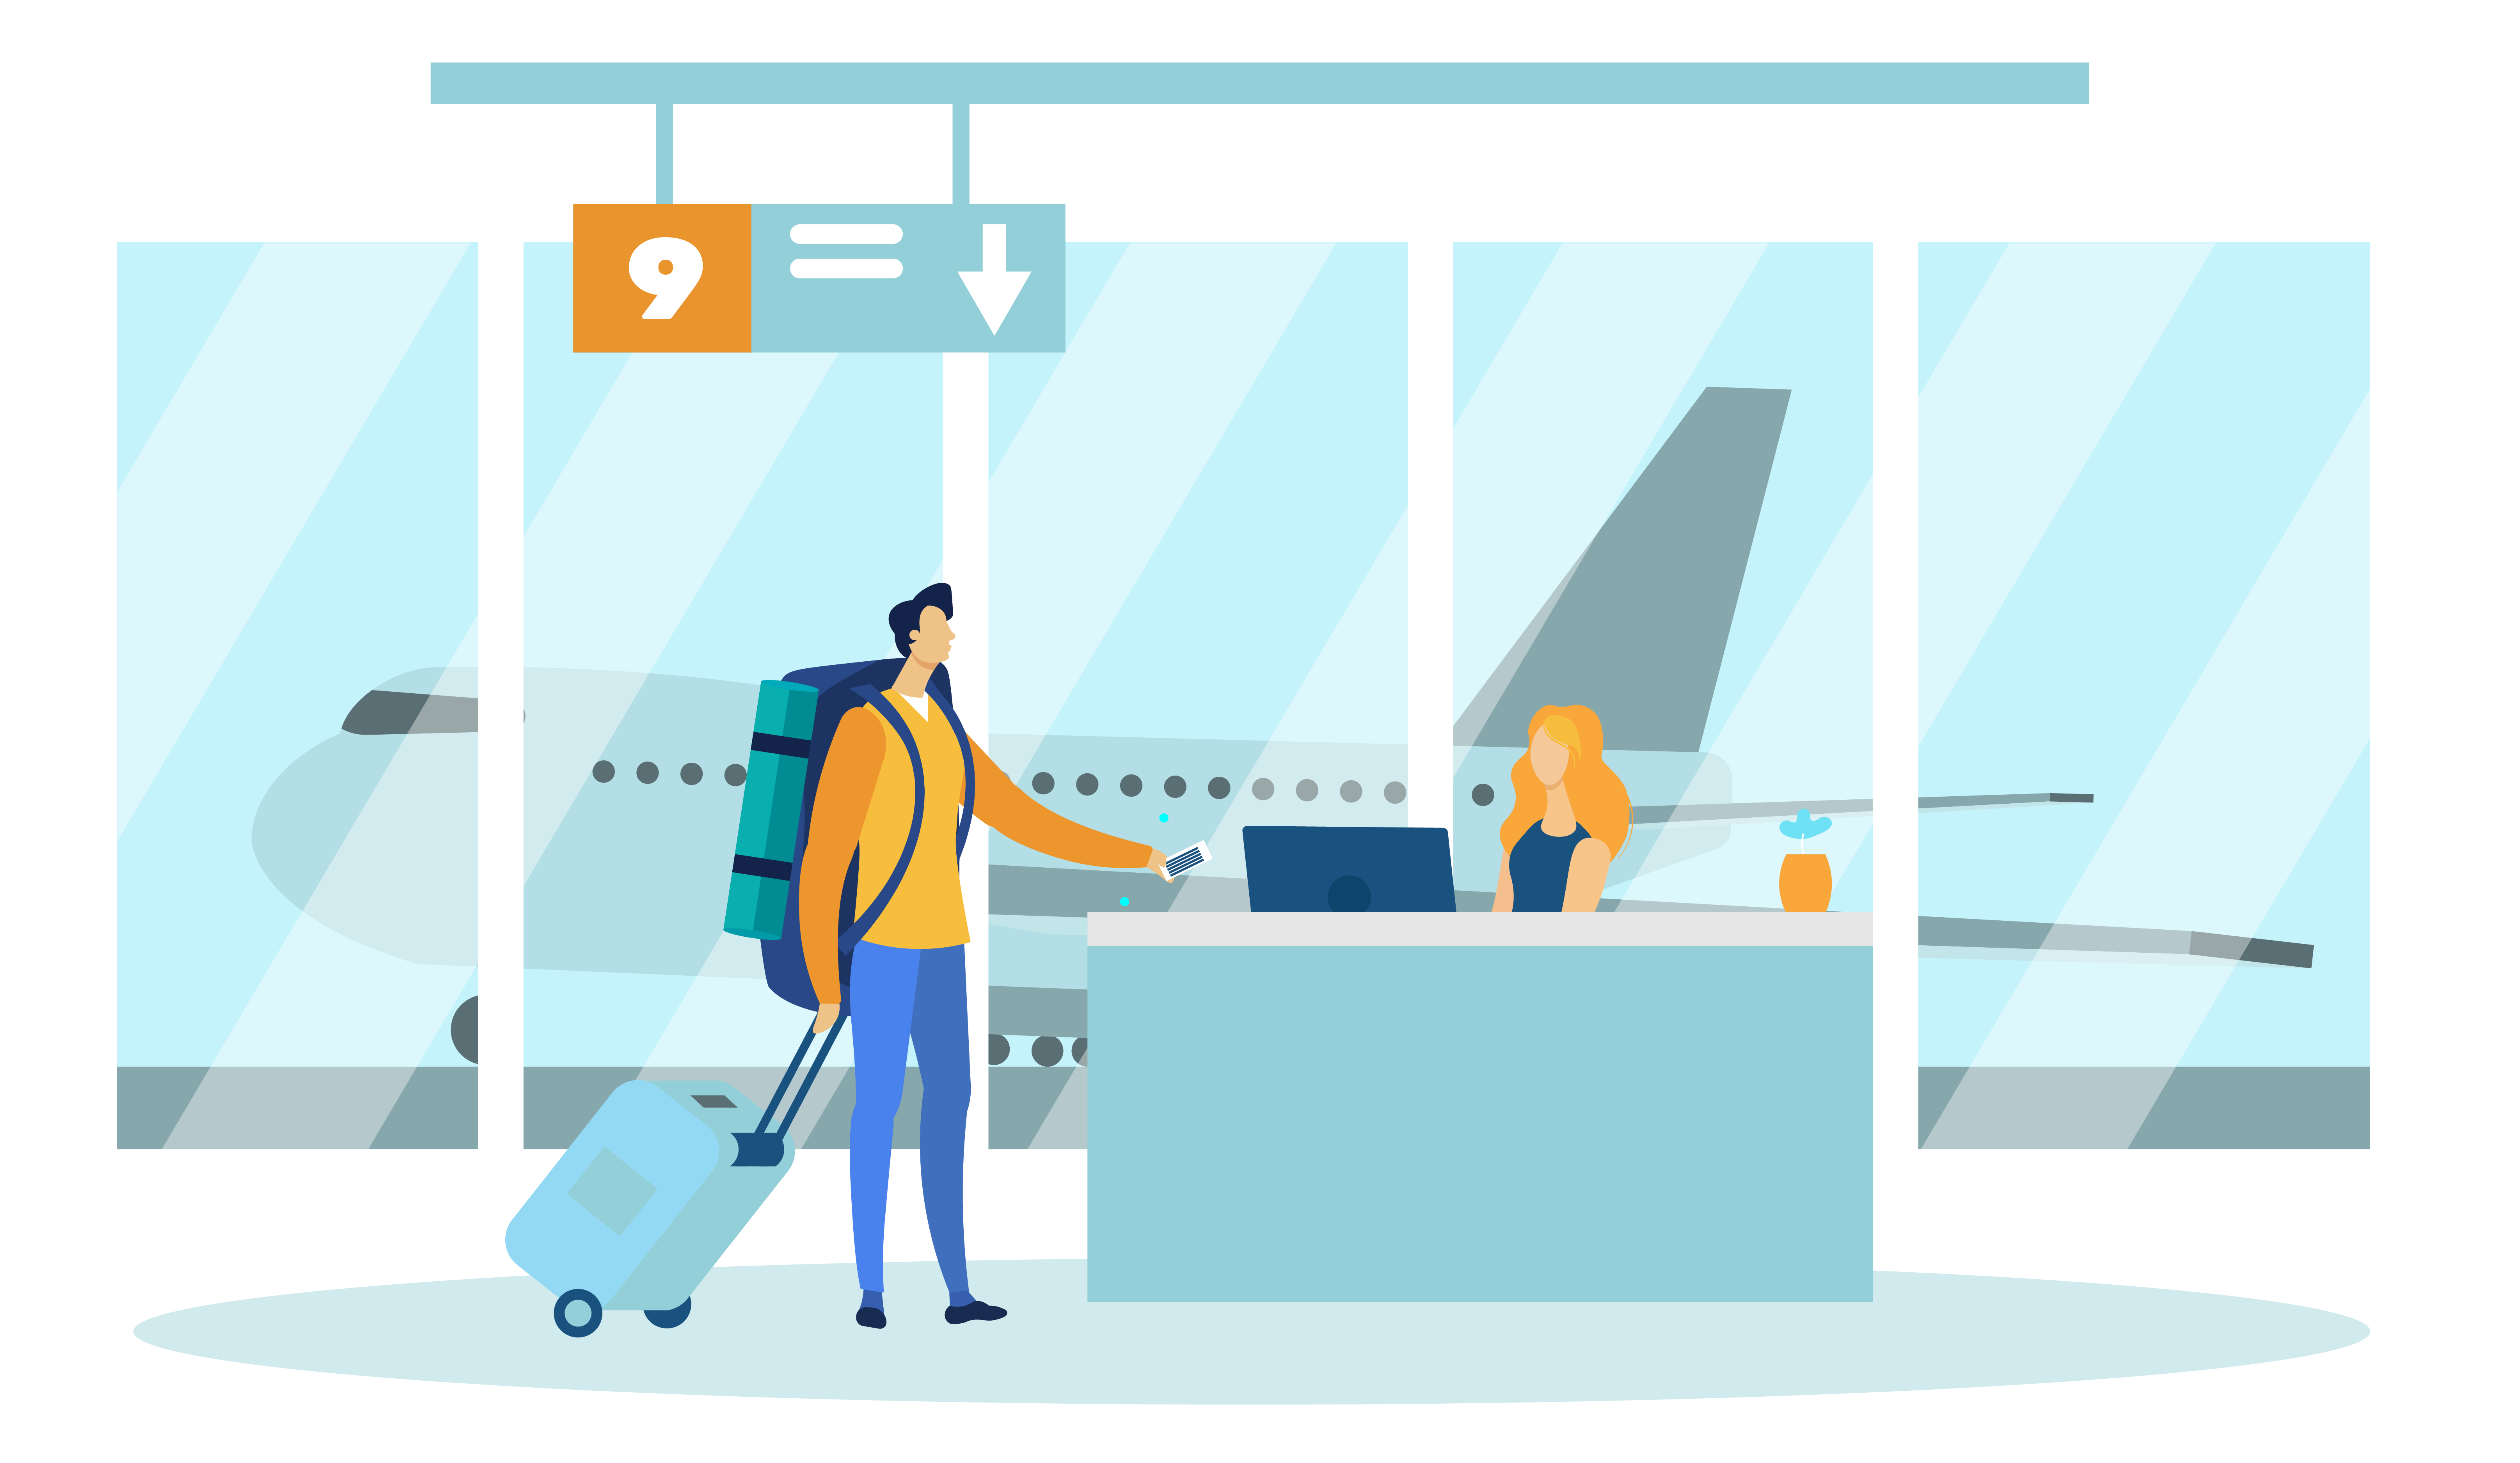 Illustration of a man at the airport to show that taking a flight is a customer experience journey that includes multiple touch points.